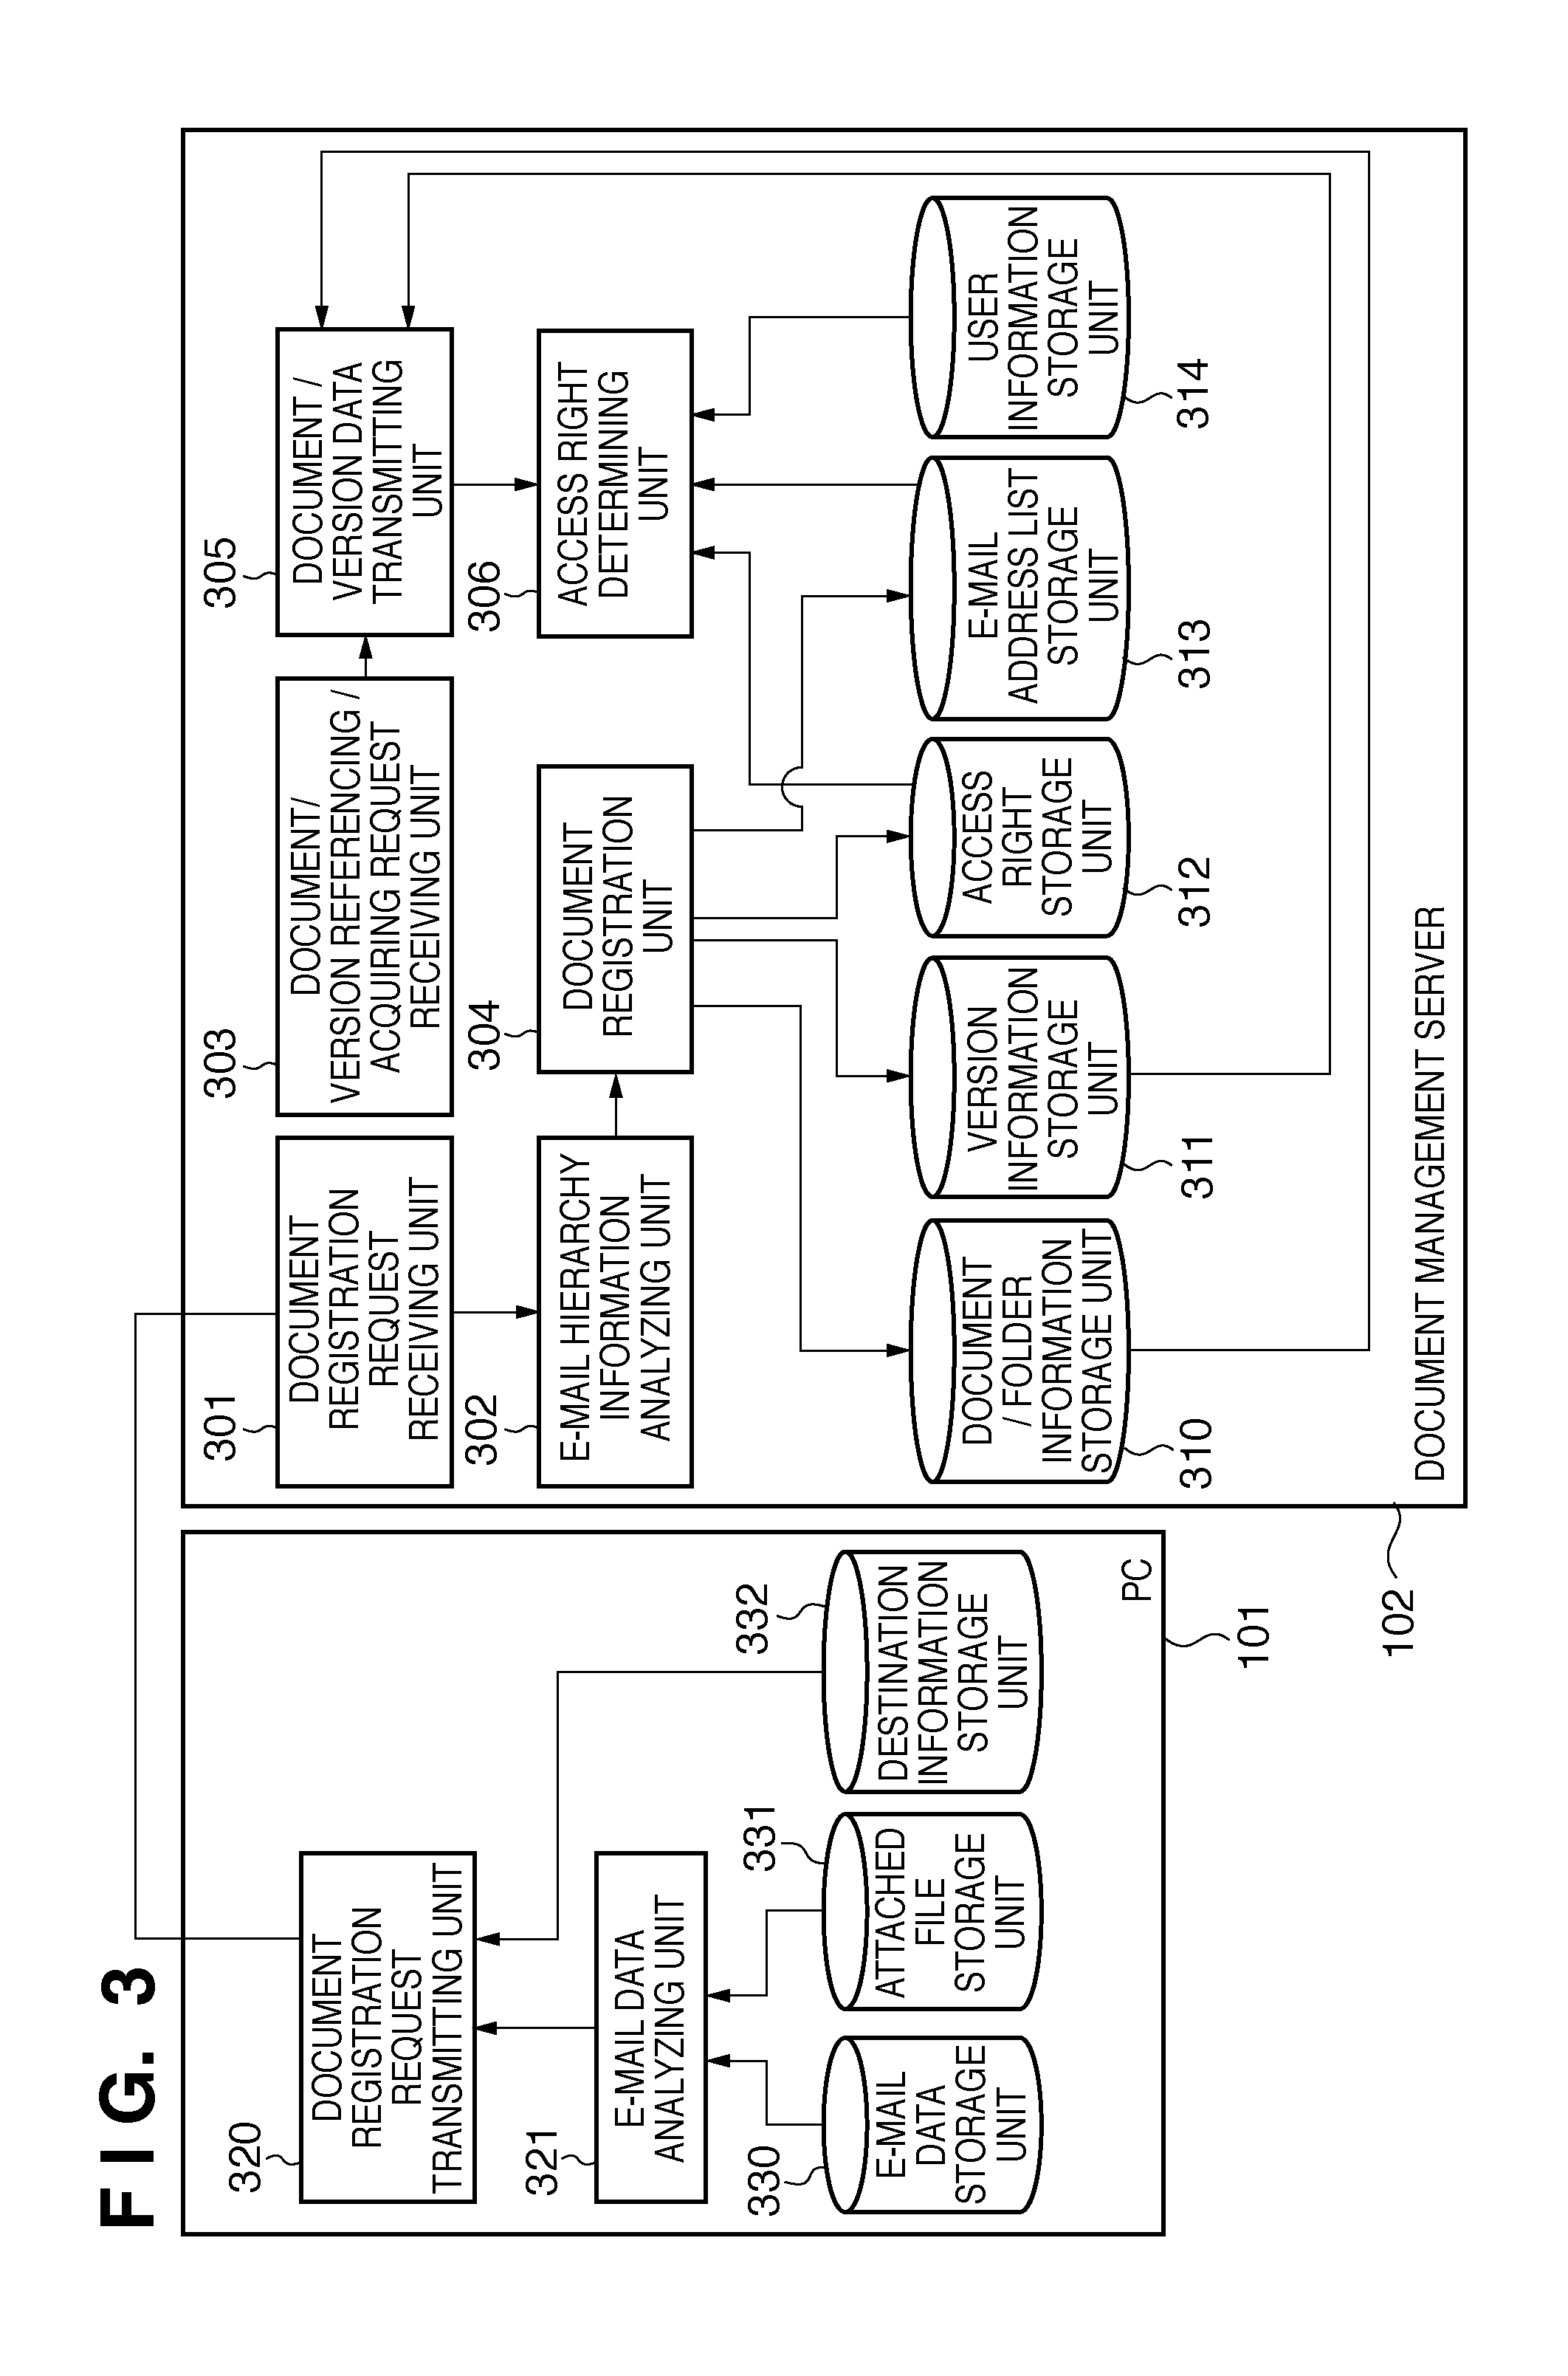 Document data sharing system and user apparatus